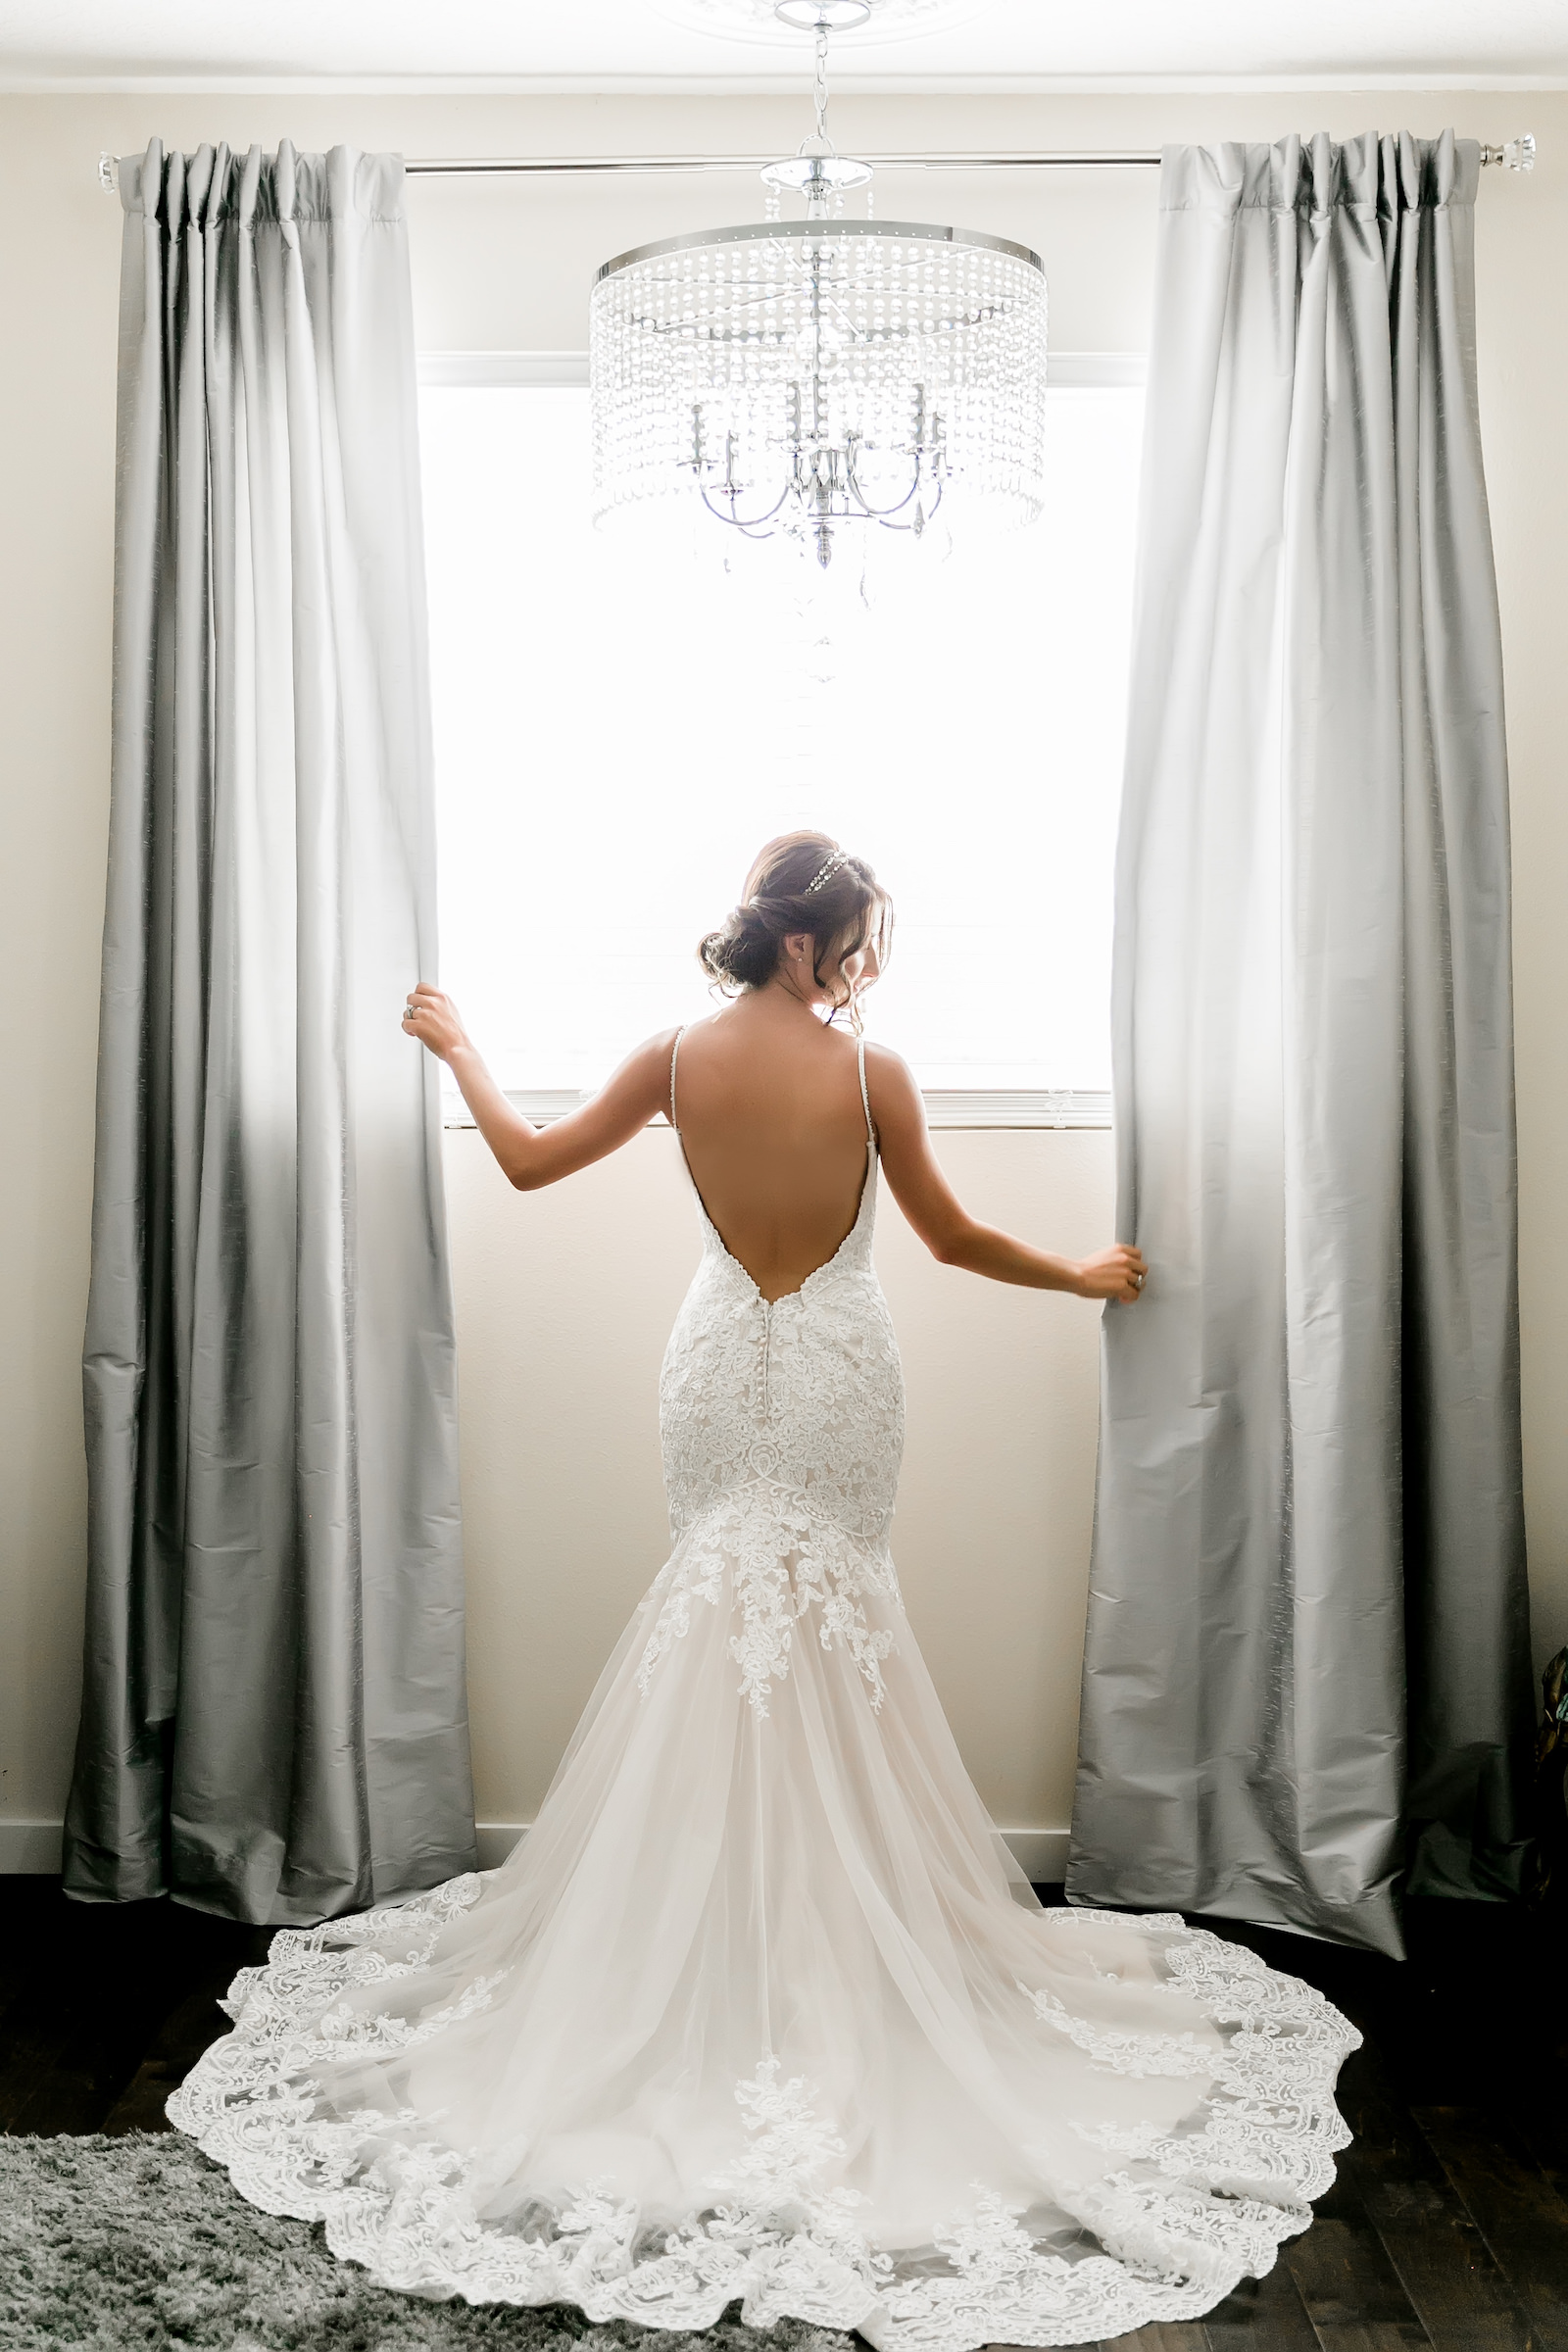 Bride Getting Ready in Backless Long Train Wedding Gown Wedding Portrait | Curled Updo with Elegant Makeup | Tampa Wedding Hair and Makeup Artist Adore Bridal